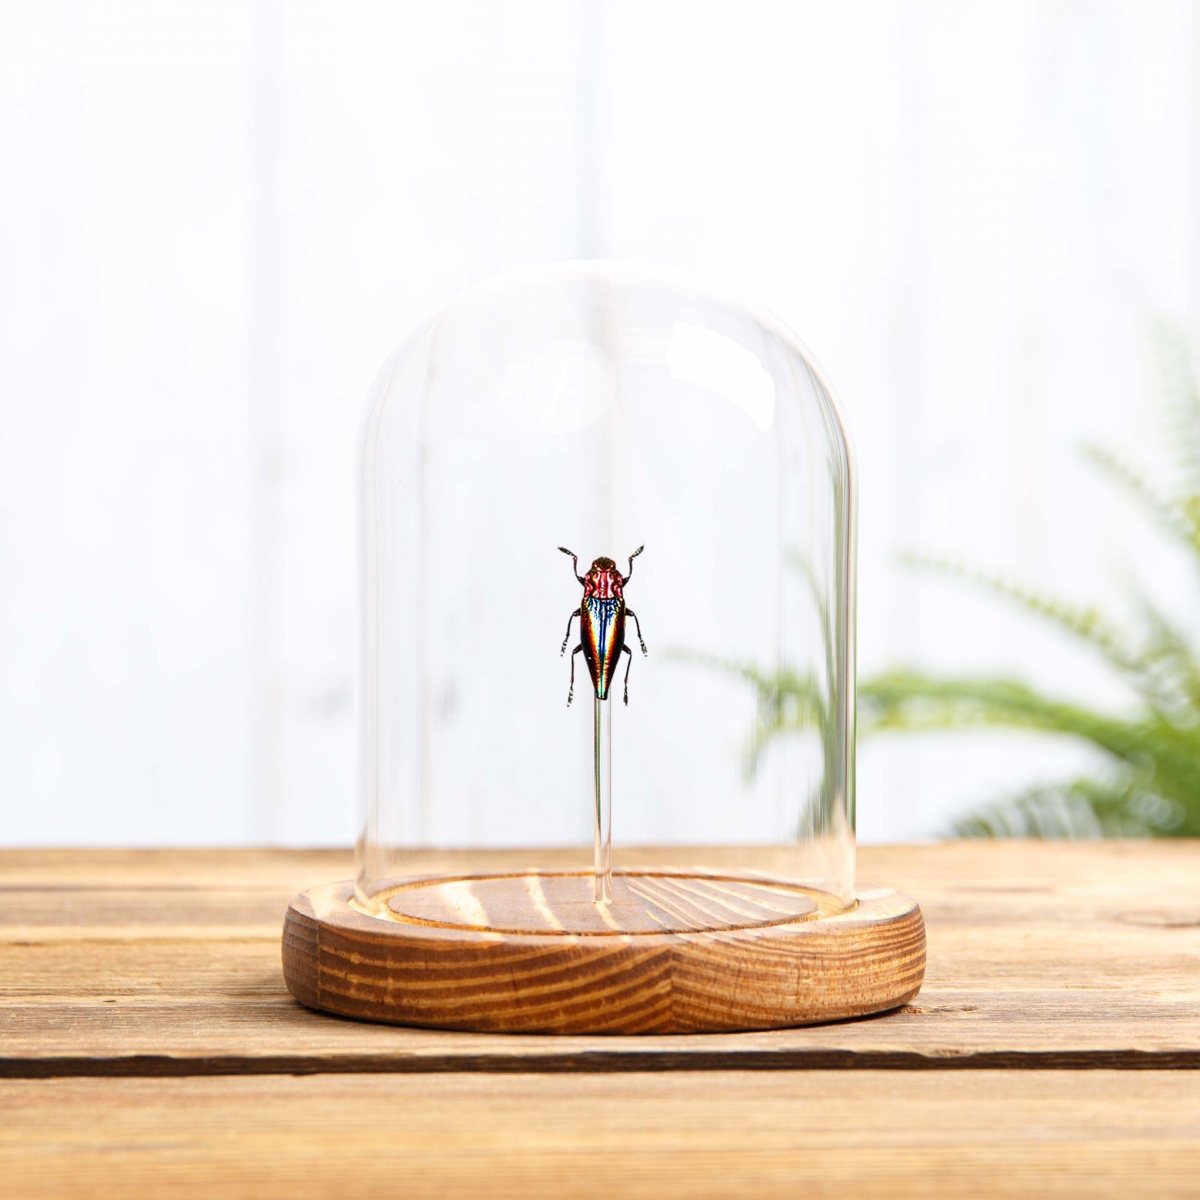 Rainbow Jewel Beetle in Glass Dome with Wooden Base  (Cyphogastra javanica)